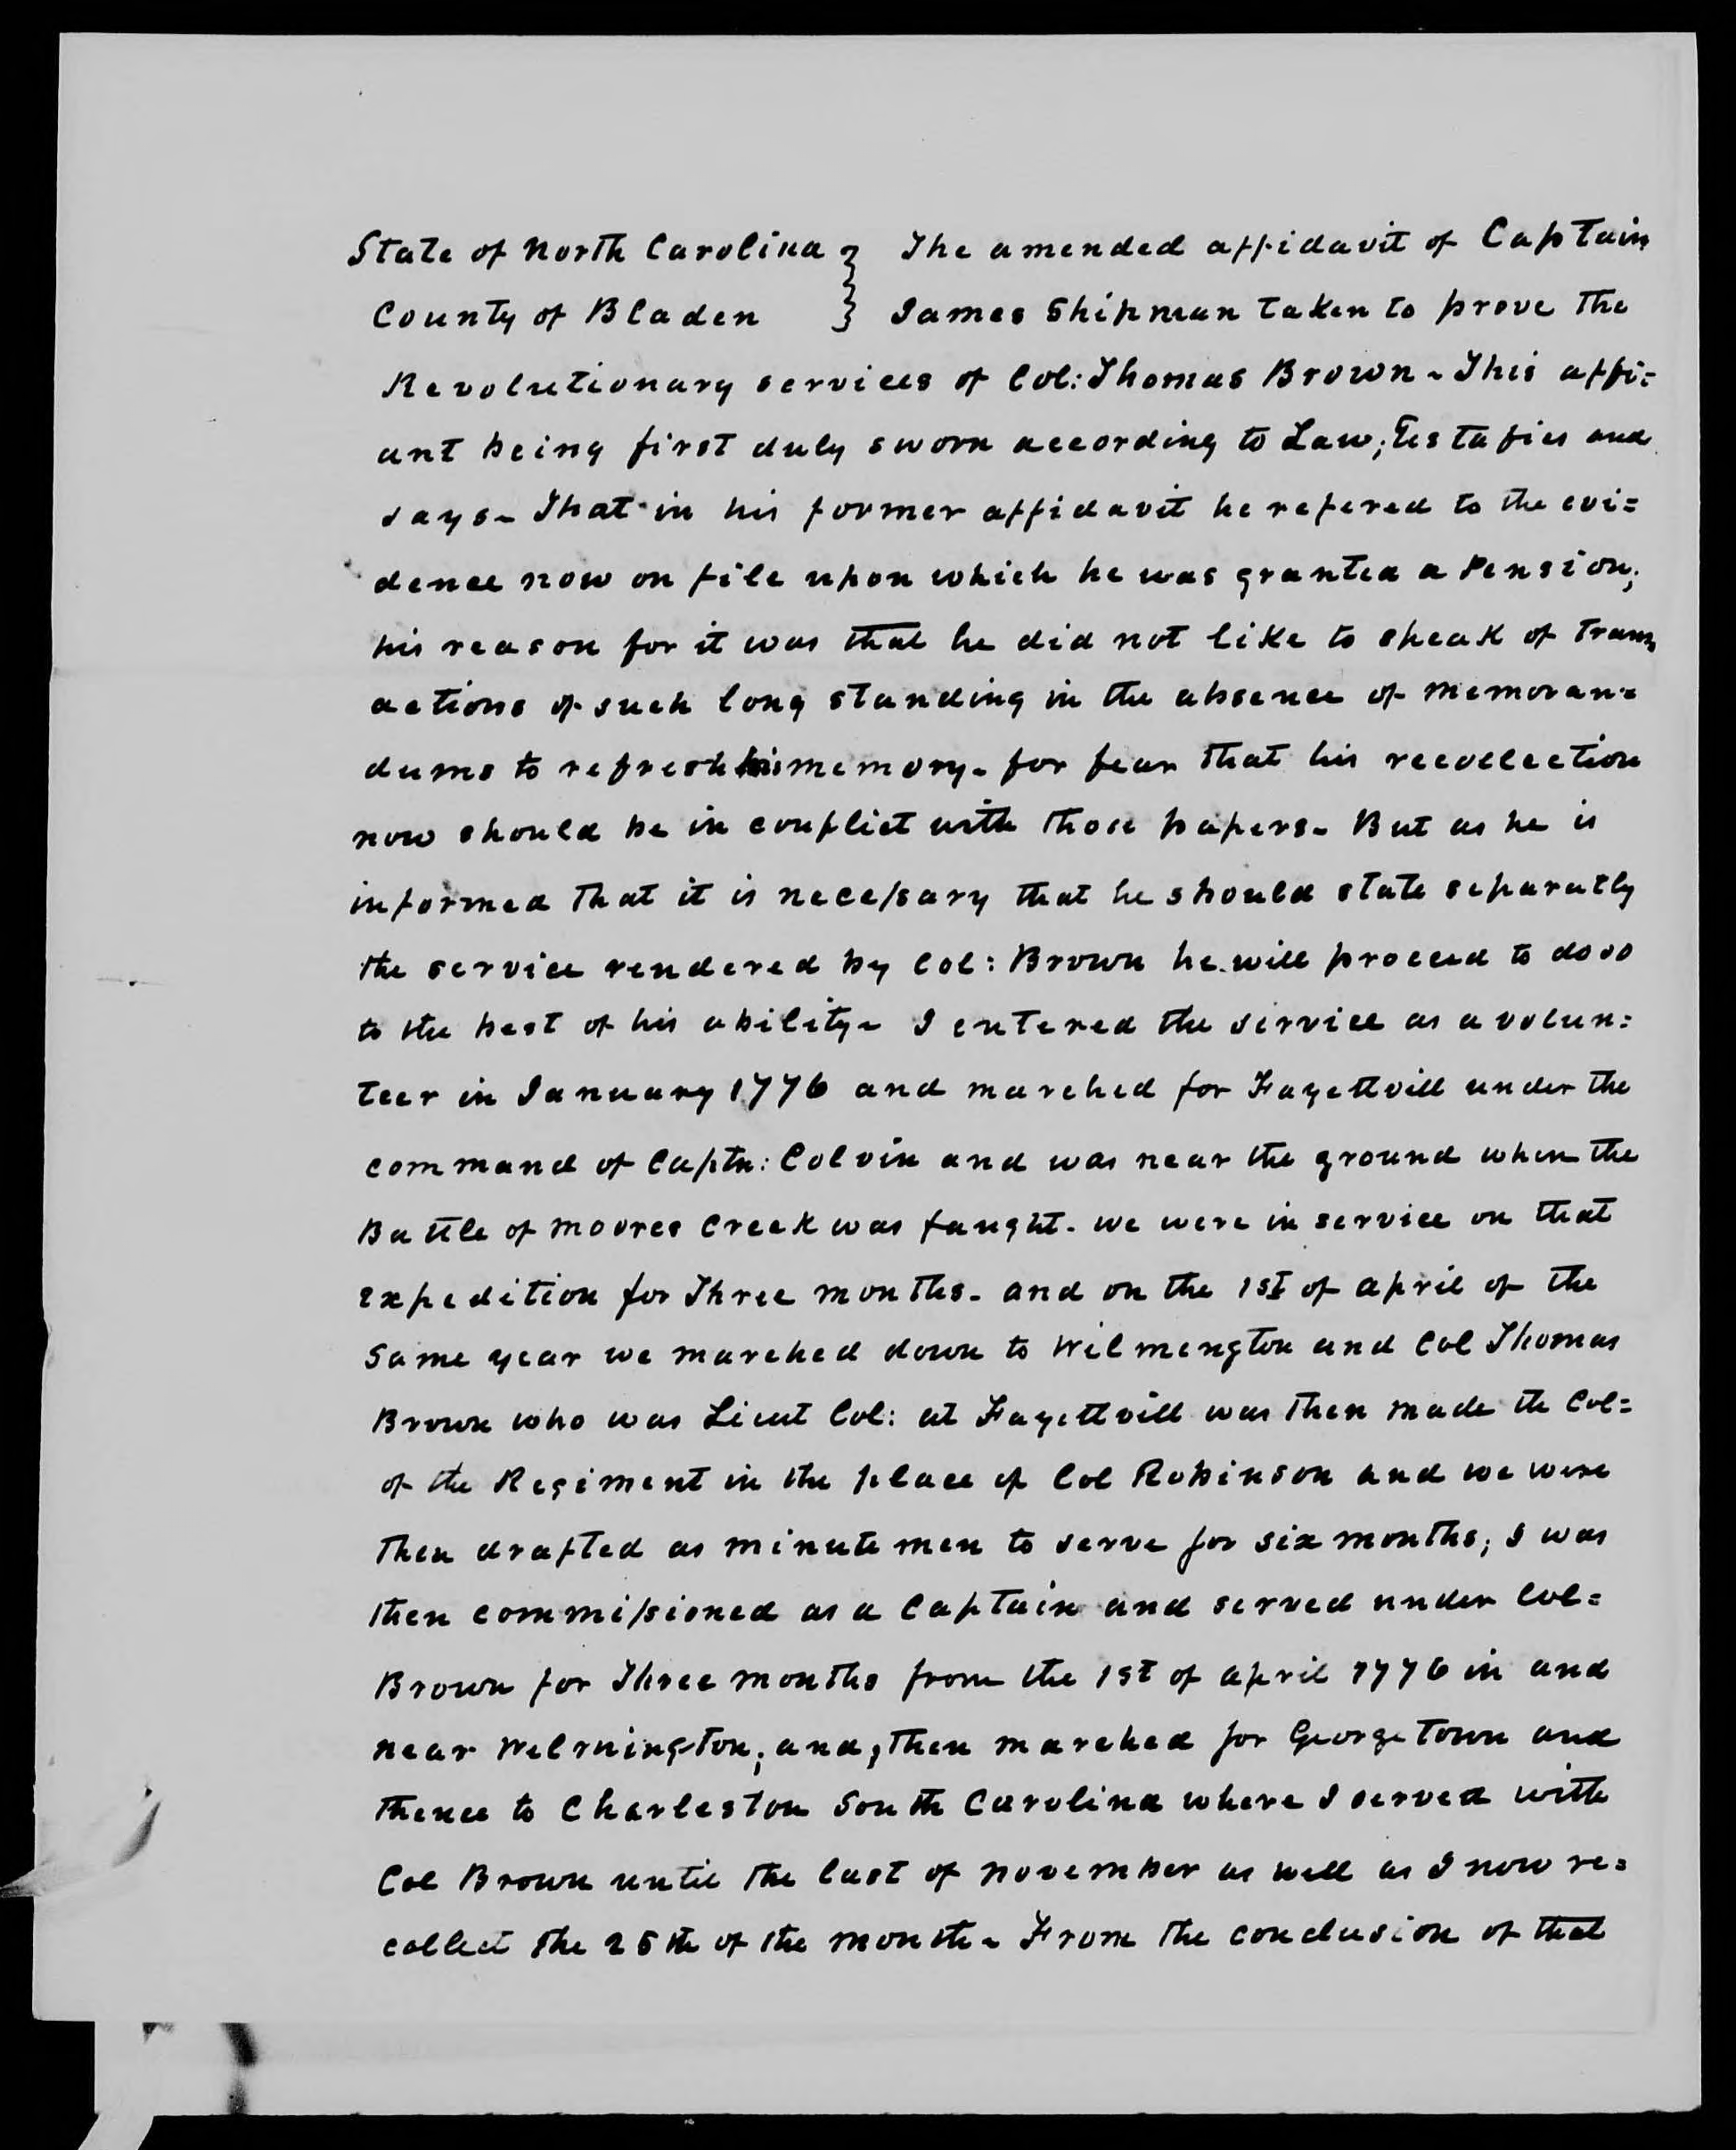 Affidavit of James Shipman (amended) in support of a Pension Claim for Lucy Brown, 8 June 1839, page 1